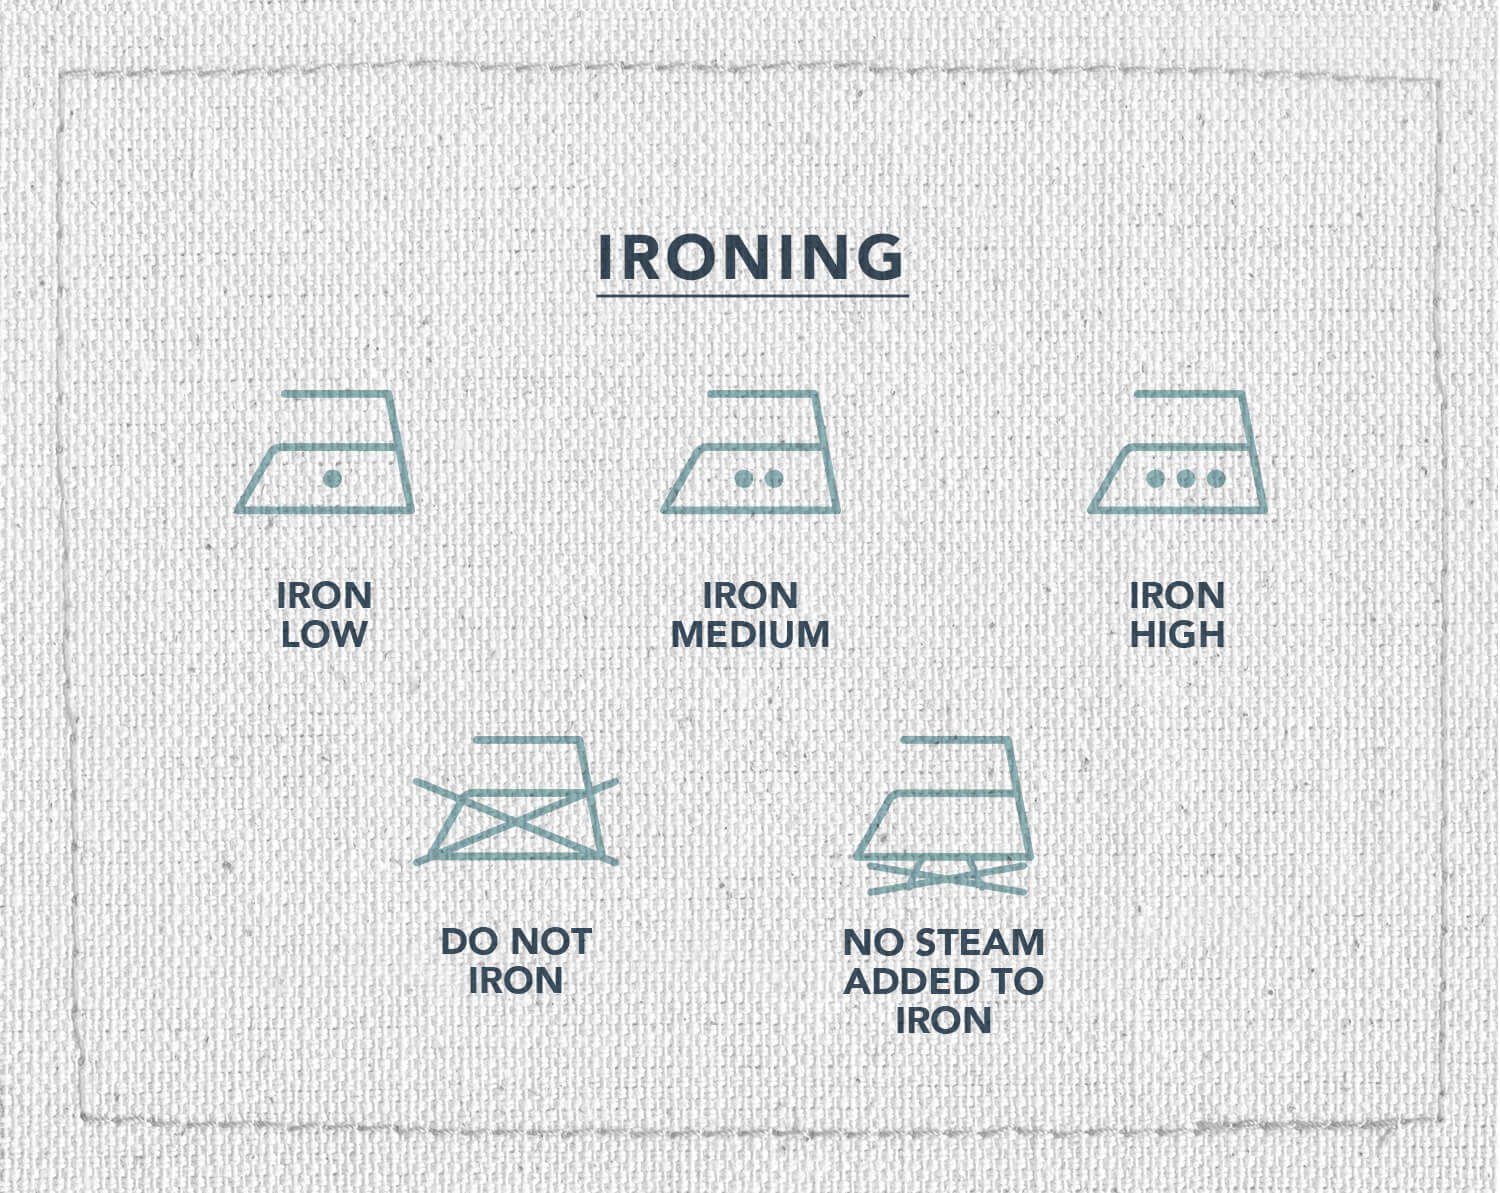 An infographic of five ironing symbols depicting which means to iron low, iron medium, iron high, do not iron, or no steam, added to iron.